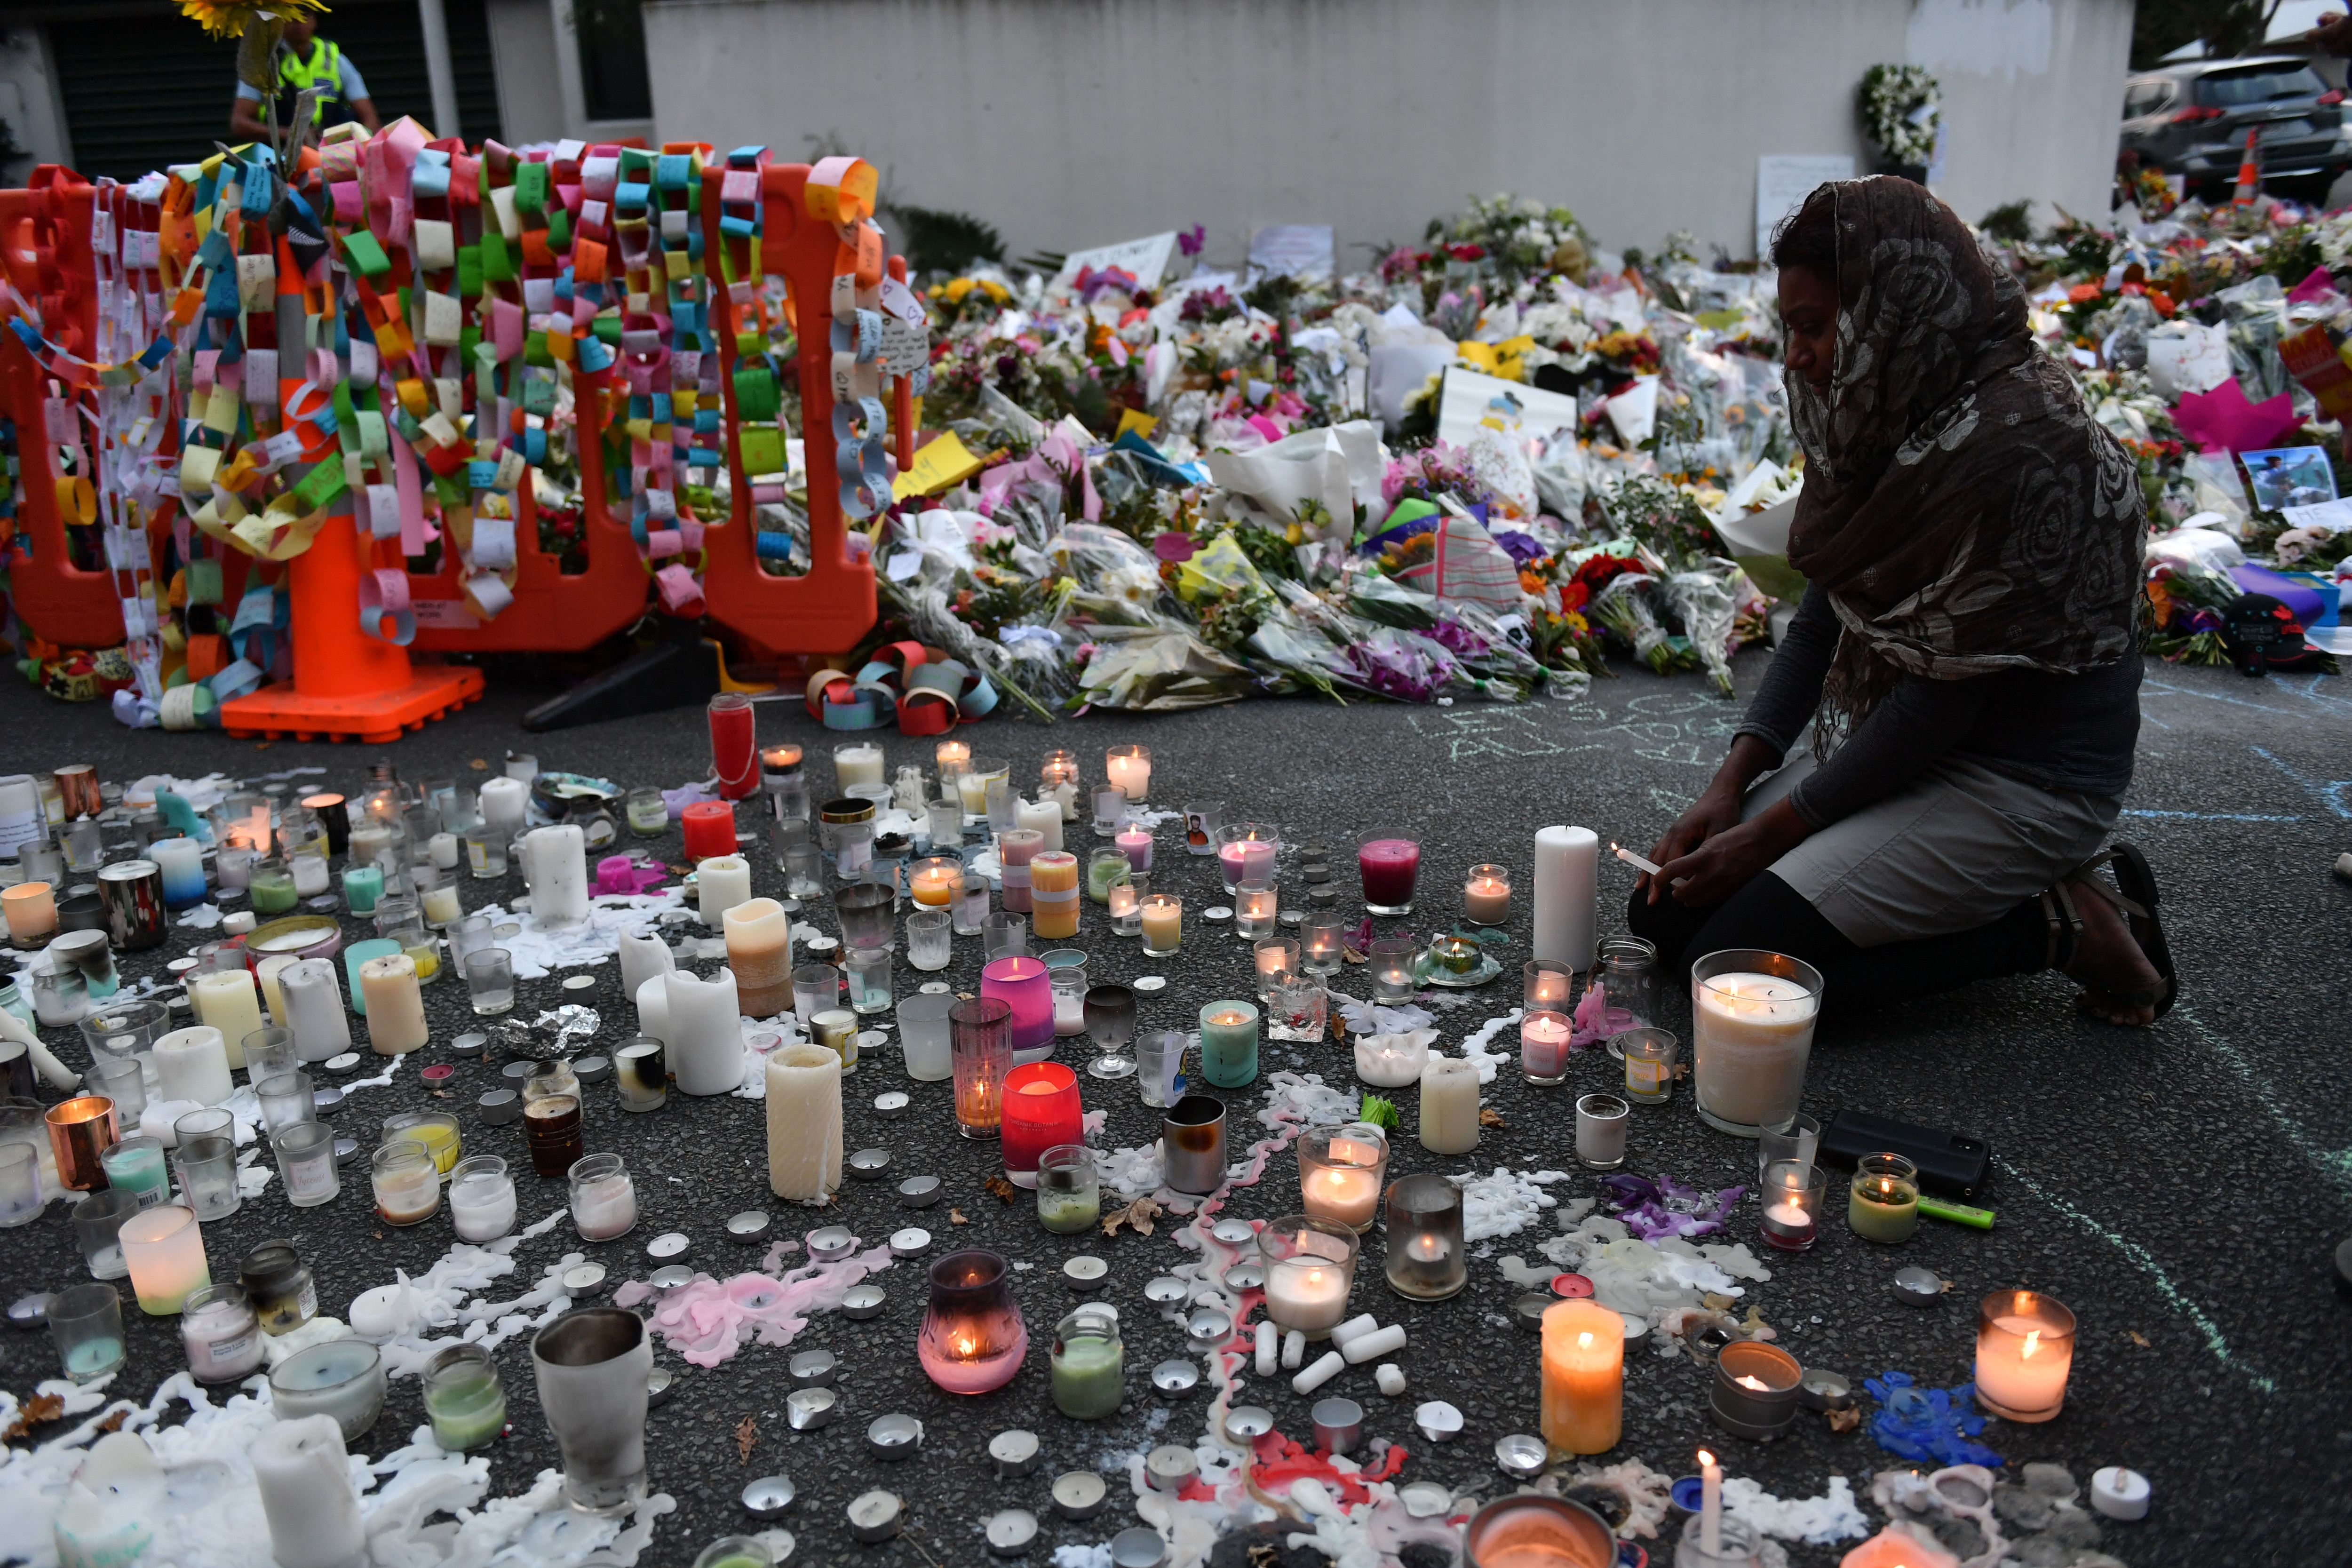 A Muslim worshipper lights candles at a makeshift memorial at the Al Noor Mosque in Christchurch.